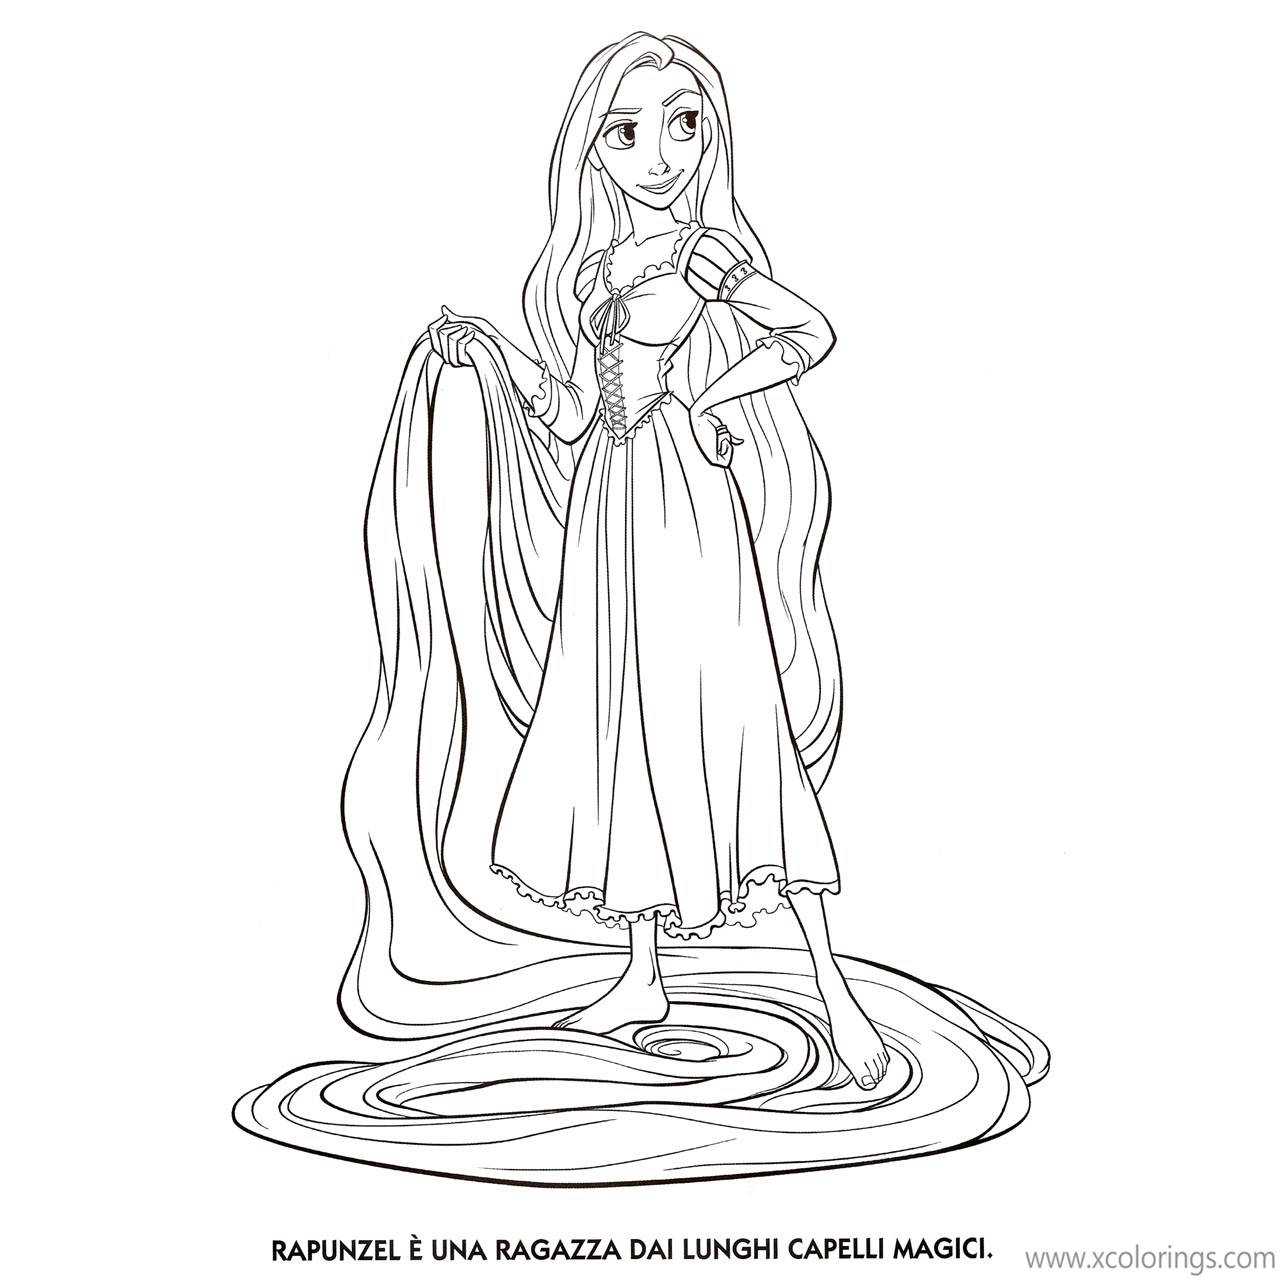 Free Rapunzel Outline Coloring Pages printable